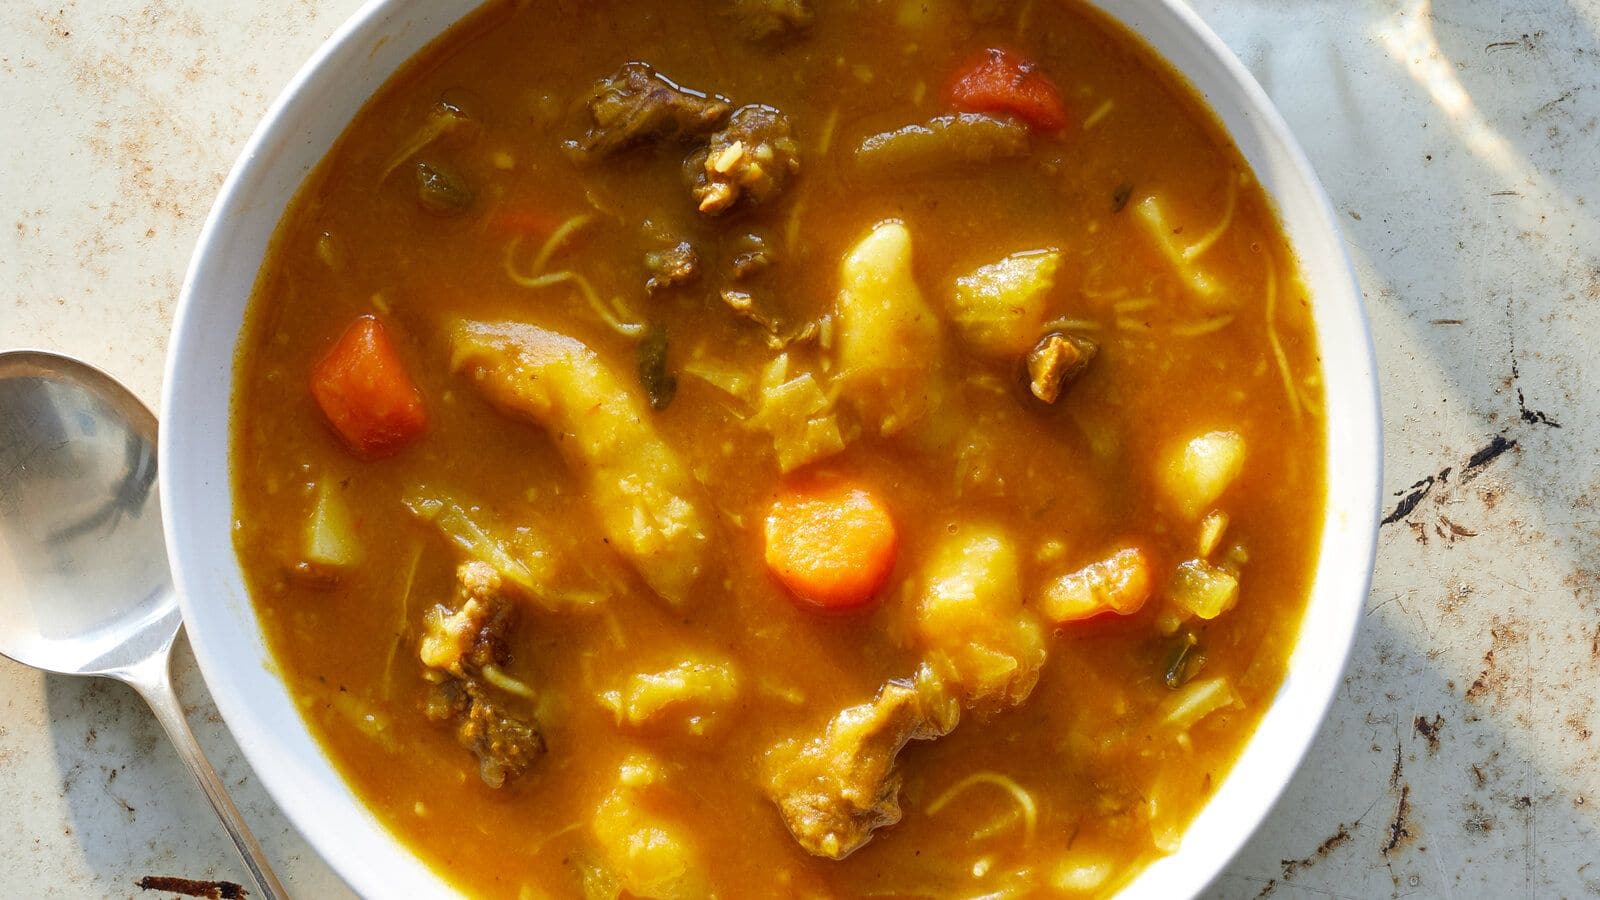 Impress your guests with this heavenly Haitian pumpkin soup recipe